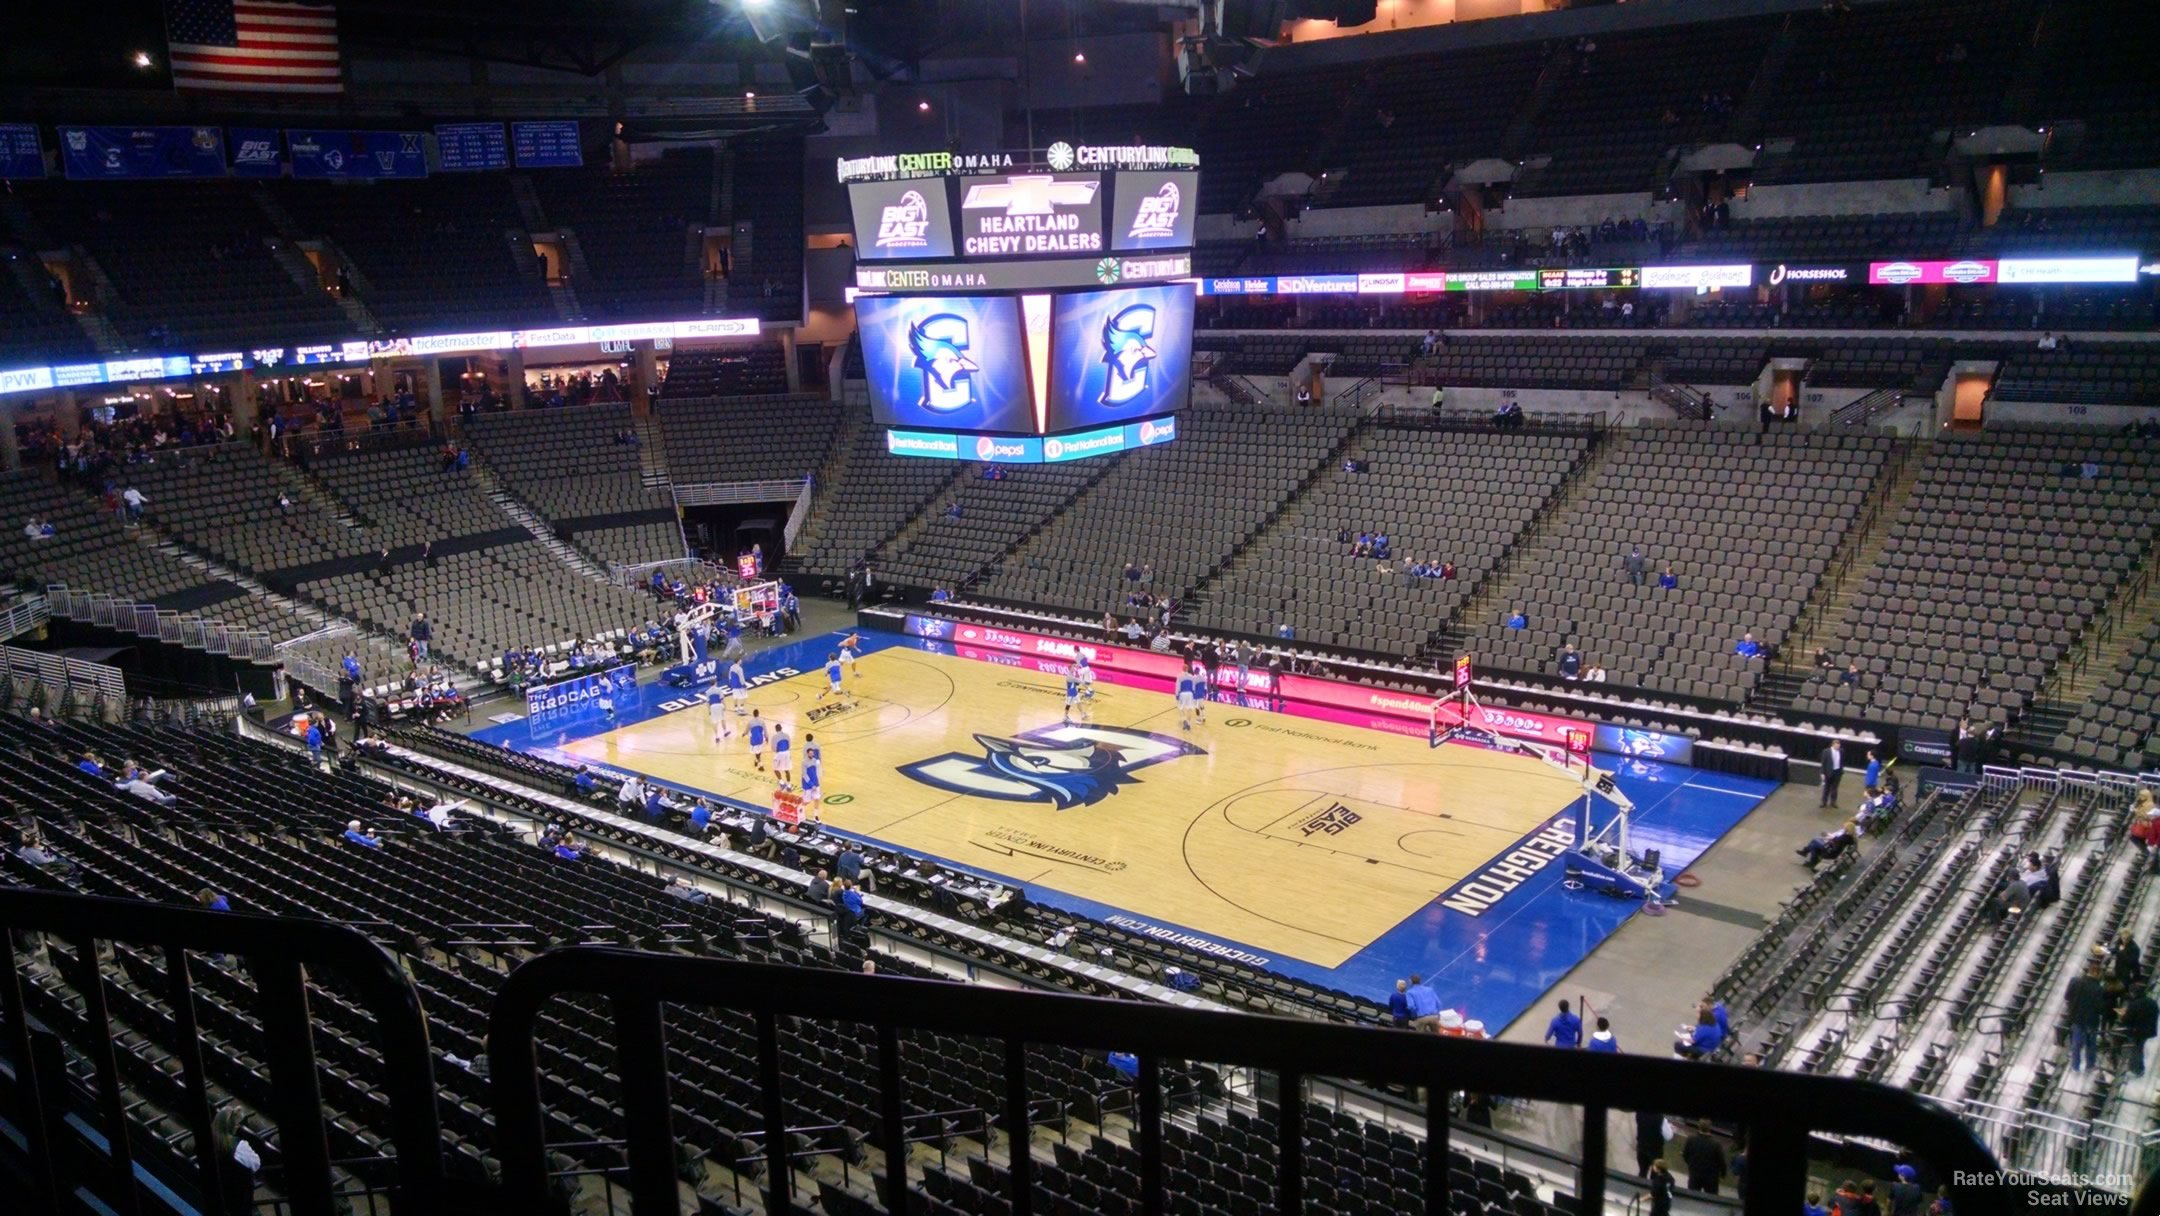 section 218, row c seat view  for basketball - chi health center omaha